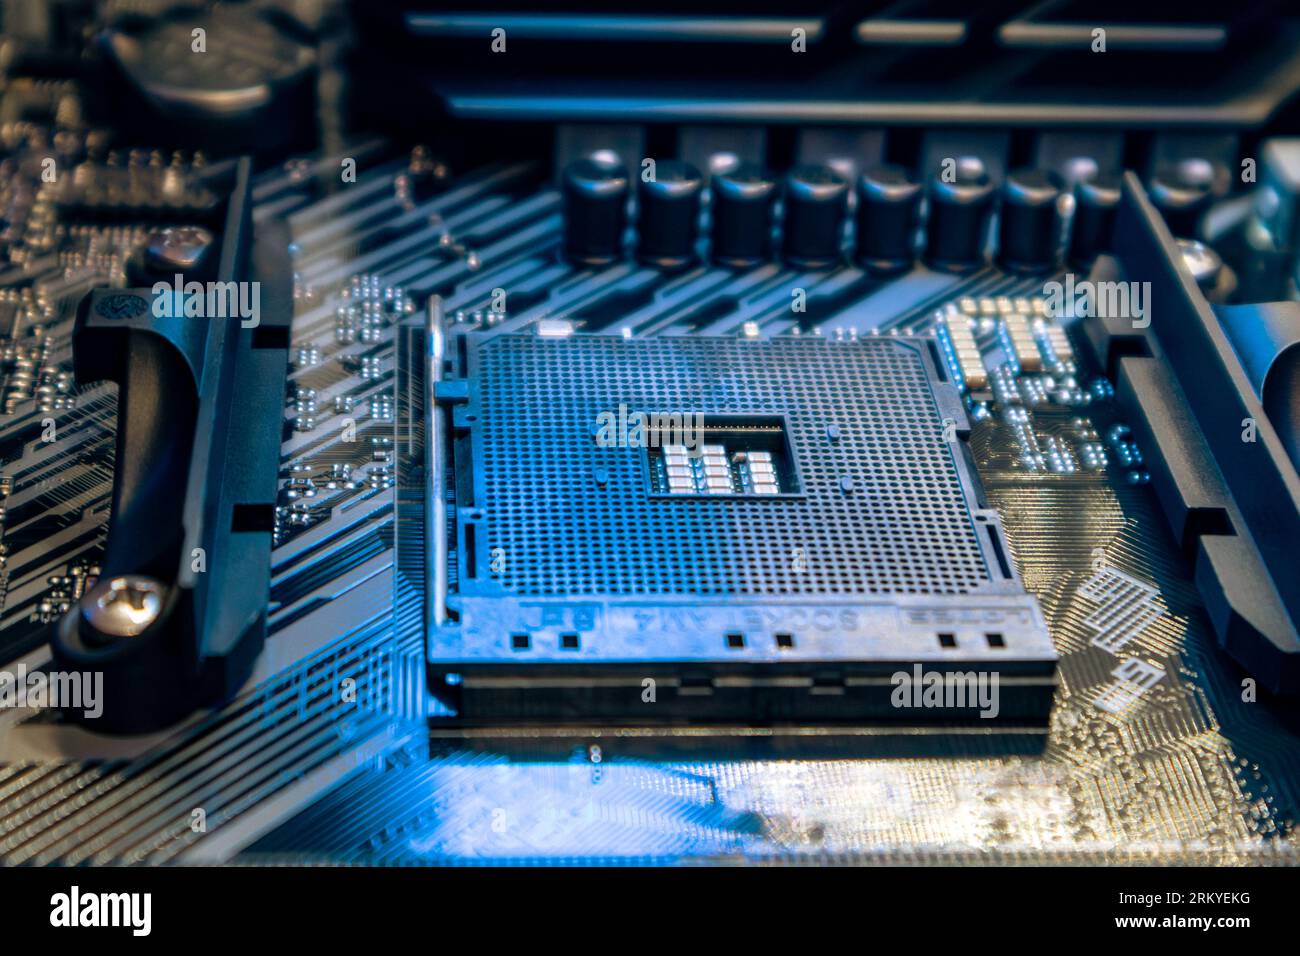 Powerful desktop PC motherboard with AM4 CPU Socket. Computer hardware chipset components close-up in blue light. Tech industry electronics background Stock Photo